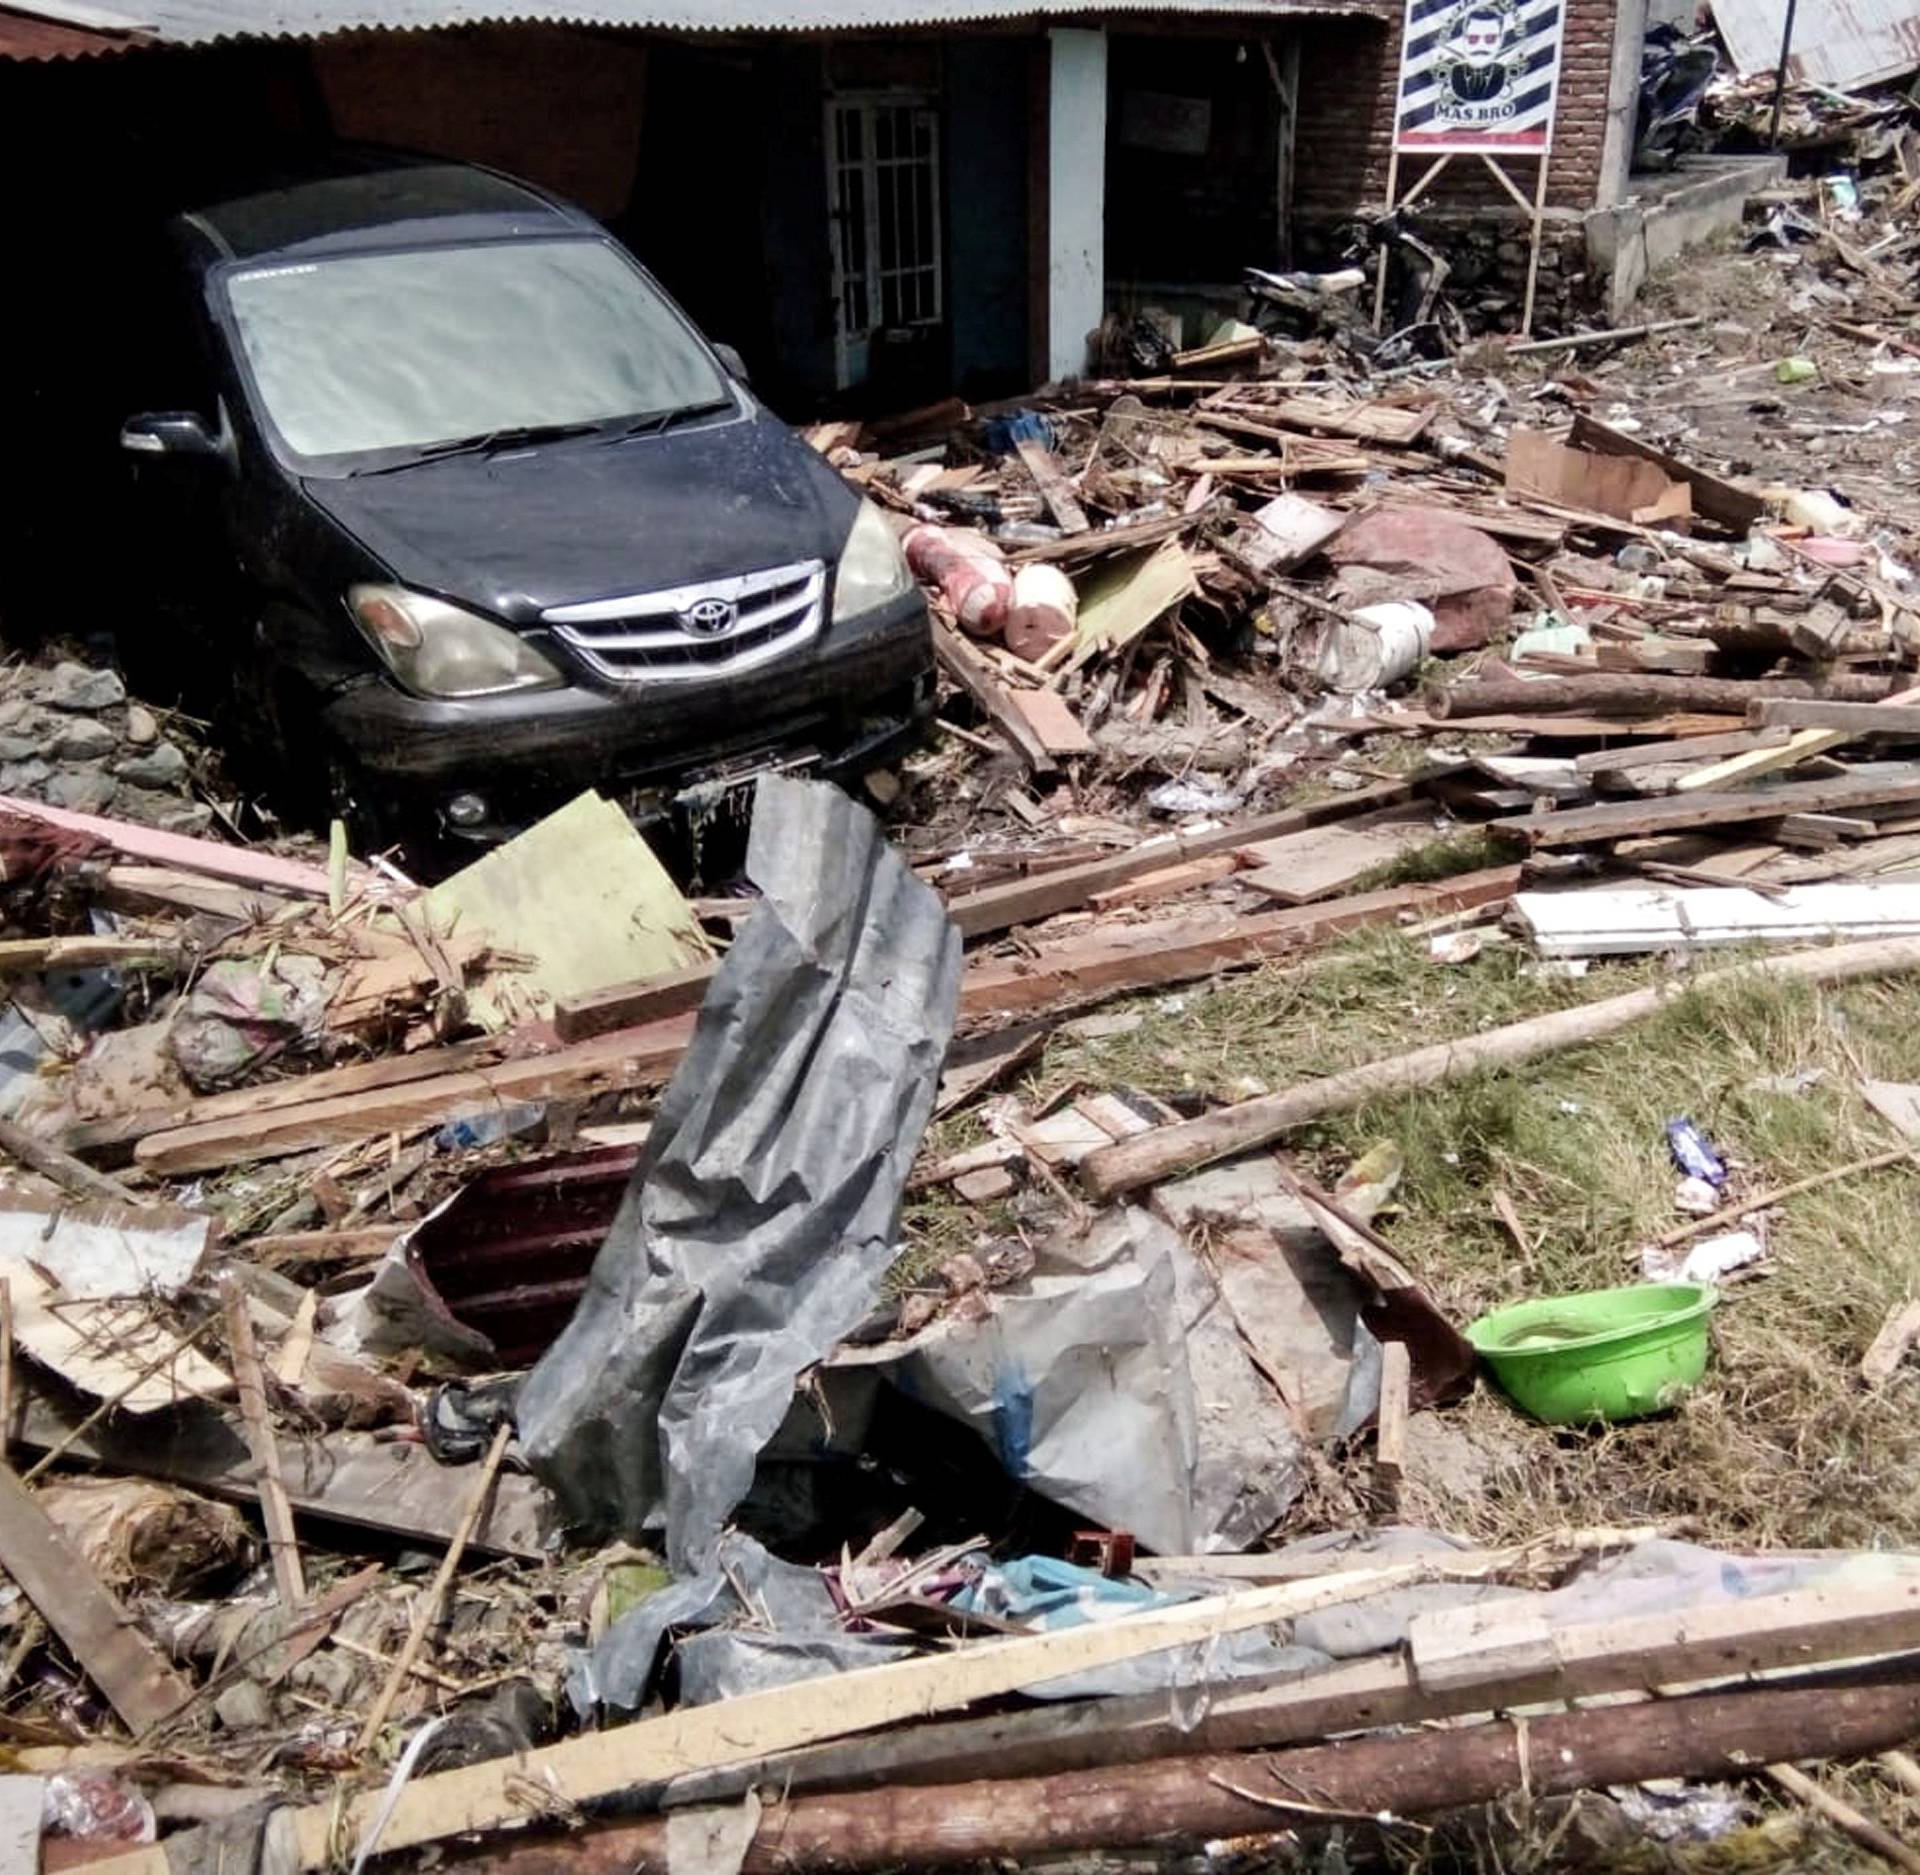 Damaged car as seen at broken house after earthquake hit in Palu